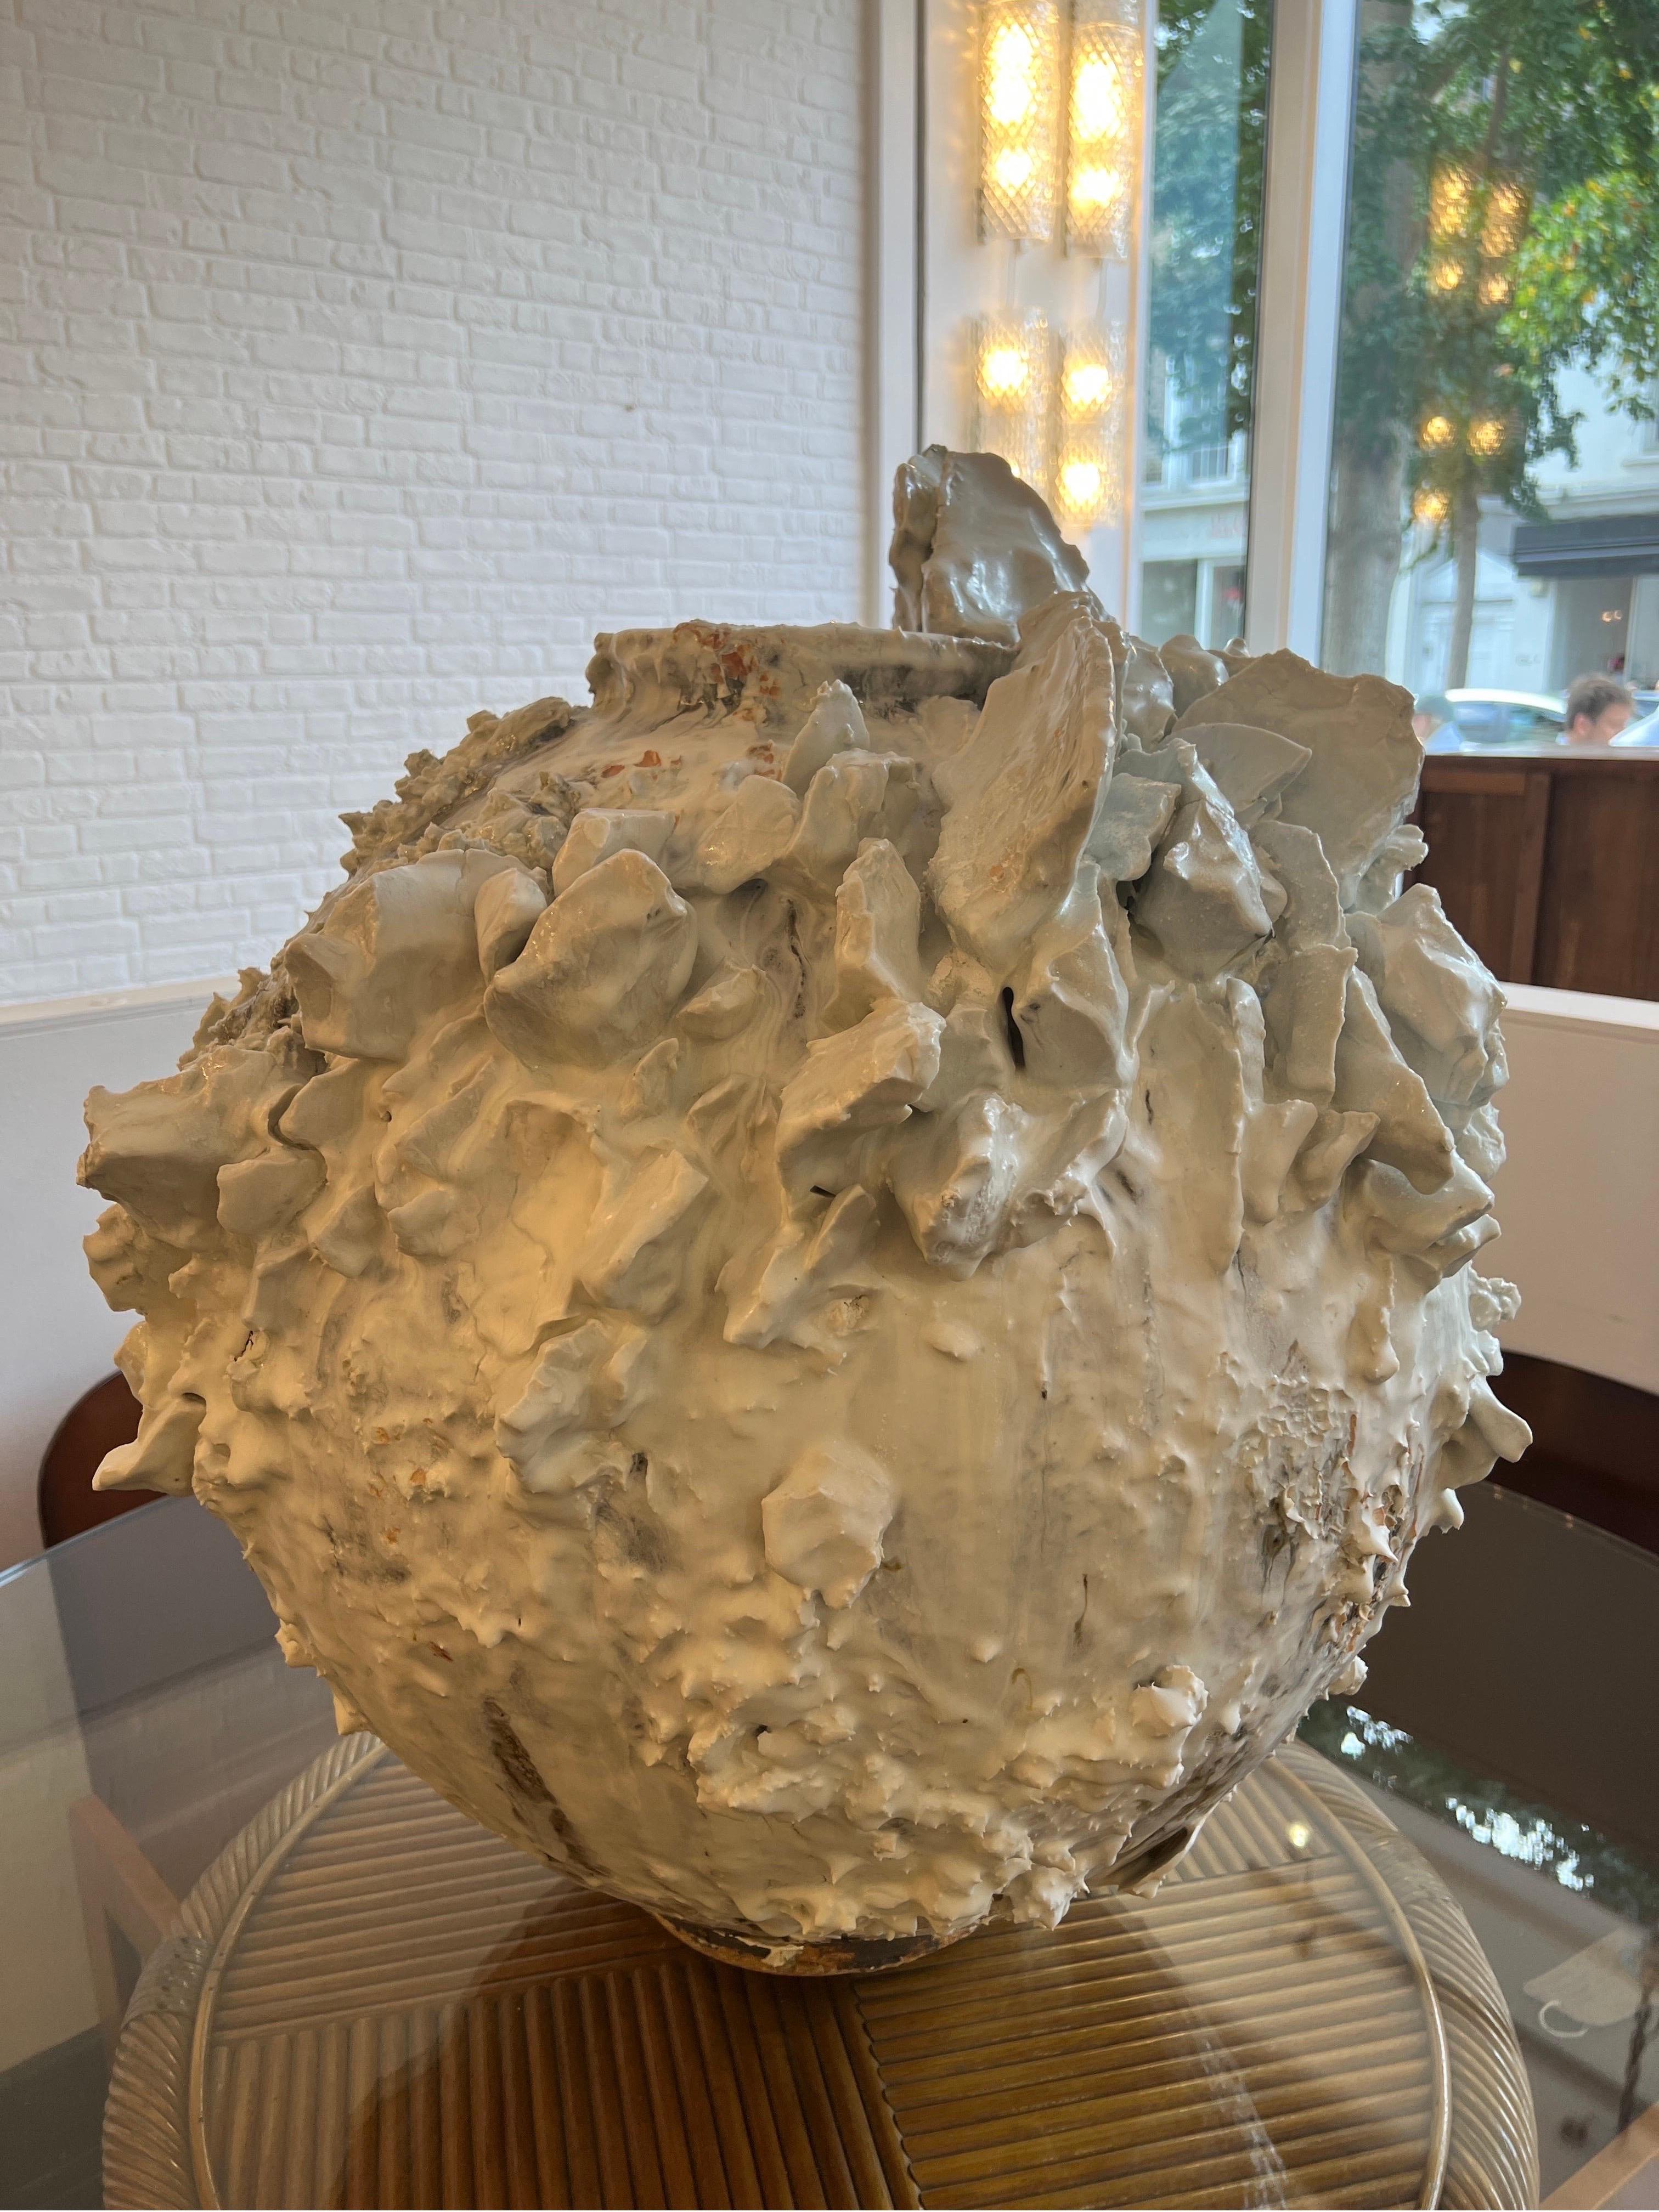 Akiko Hirai extra large moon jar made from Stoneware, porcelain, white glaze and wood ash 2021
H72cm (28.5 inches) W65cm (25.6inches)

Loewe Craft Prize Finalist, Akiko Hirai’s work is a fusion of Japanese and British ceramic traditions. Based on